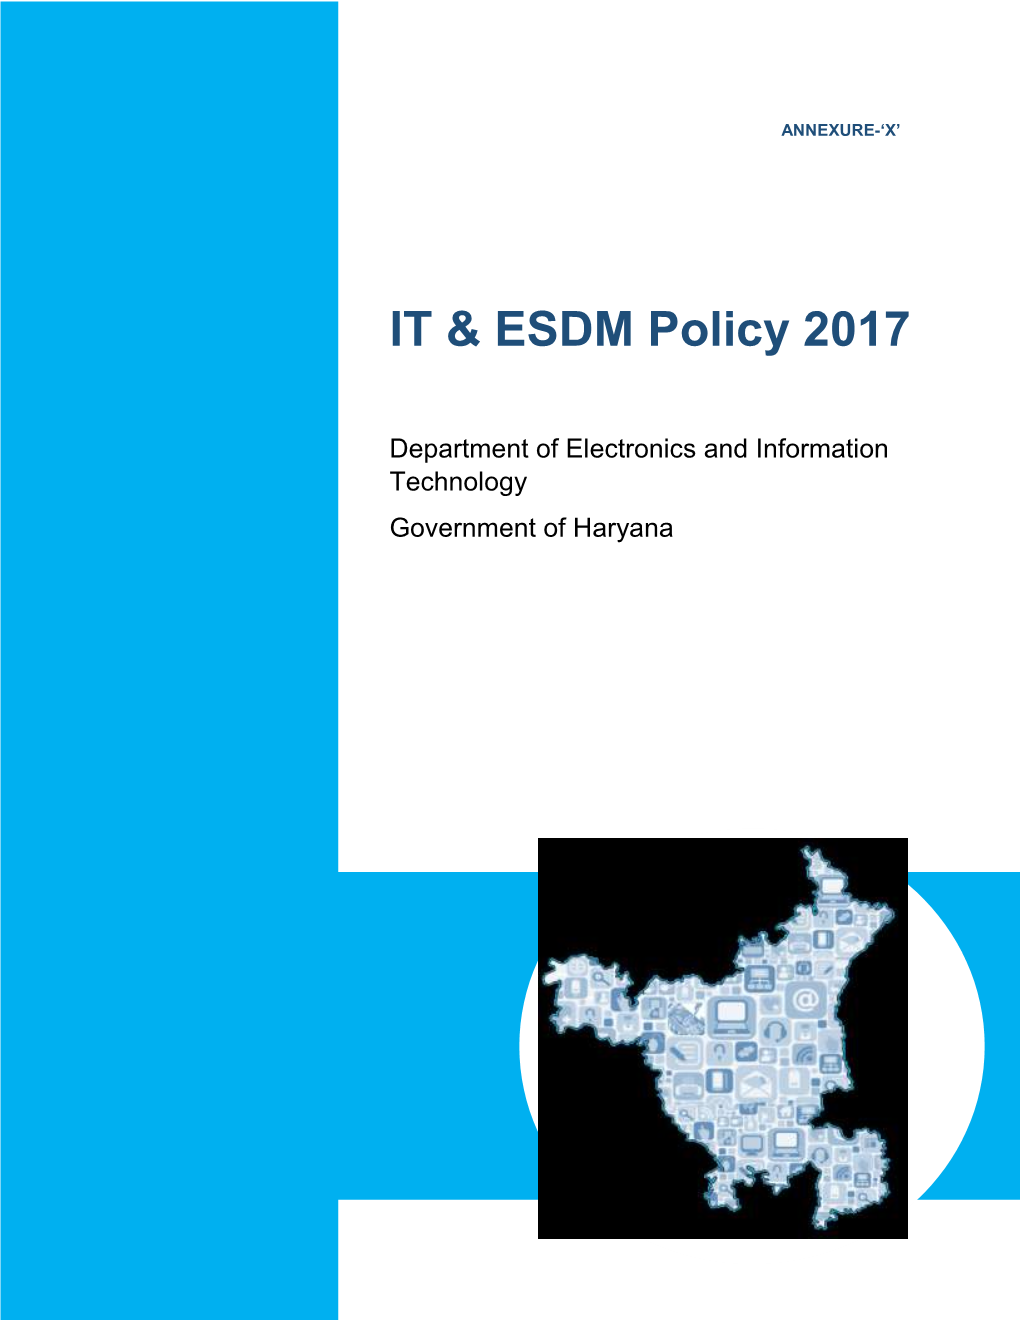 IT & ESDM Policy 2017